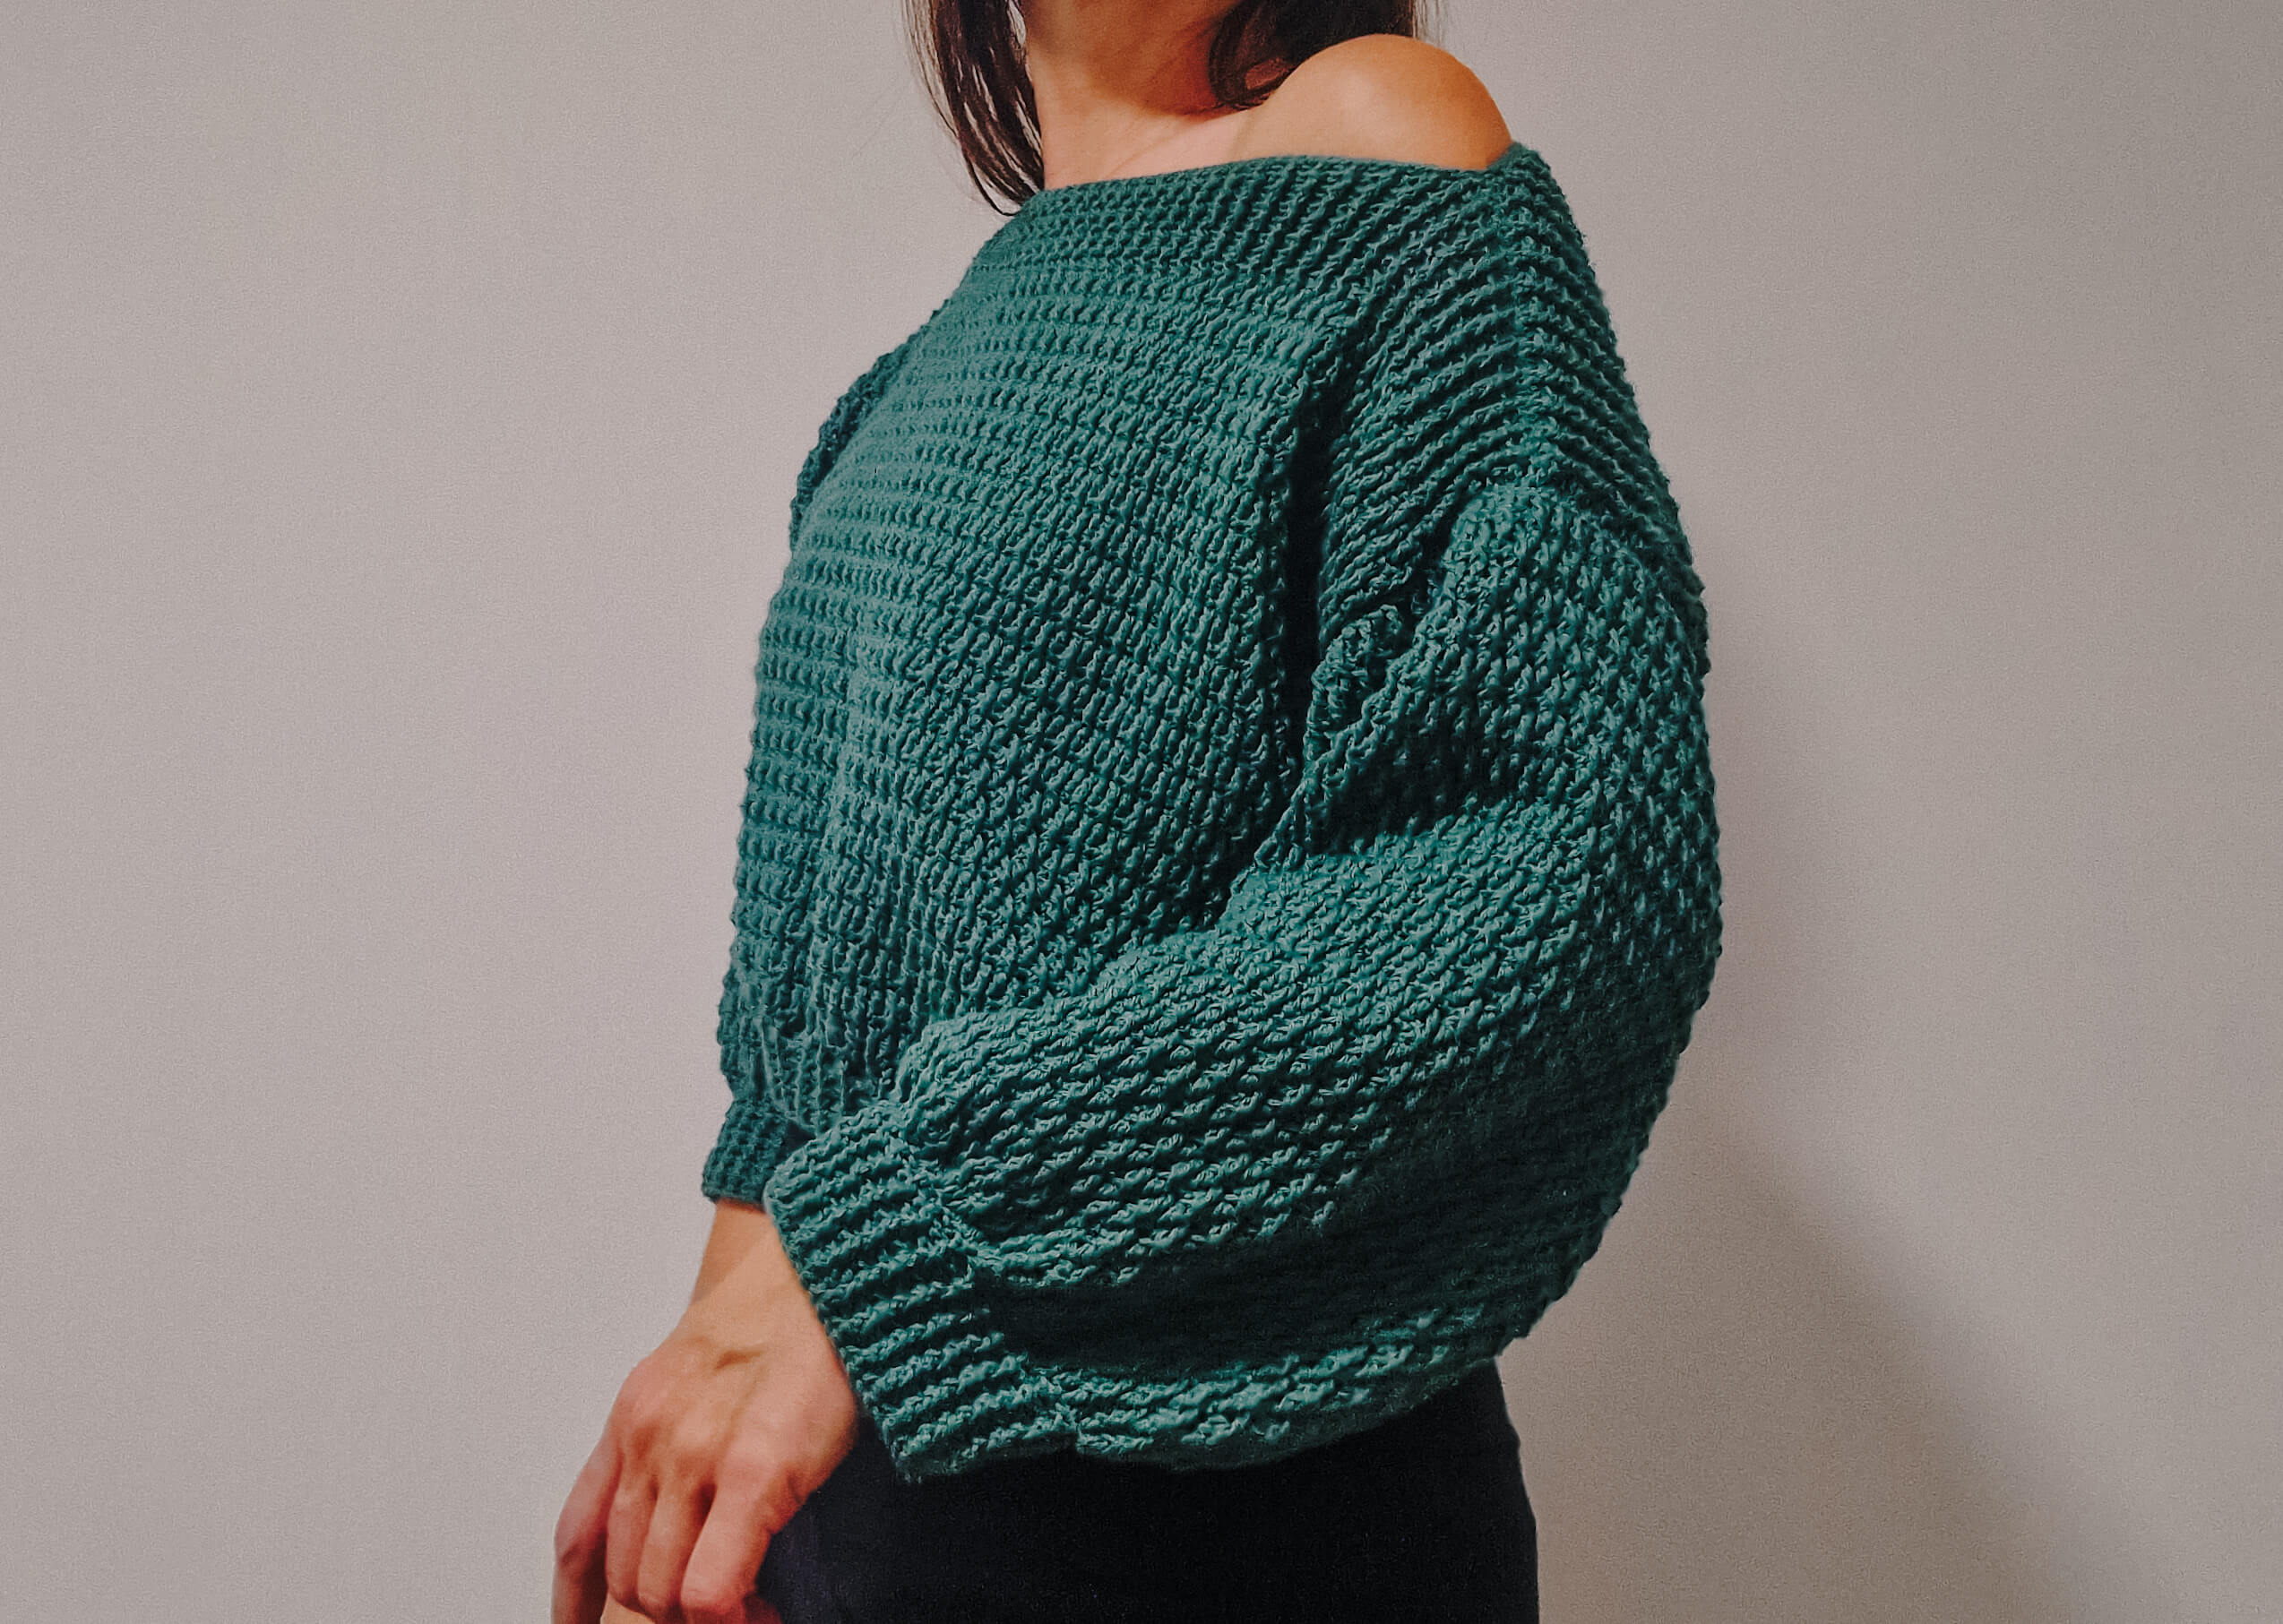 How to Crochet an Alpine Stitch Cropped Sweater